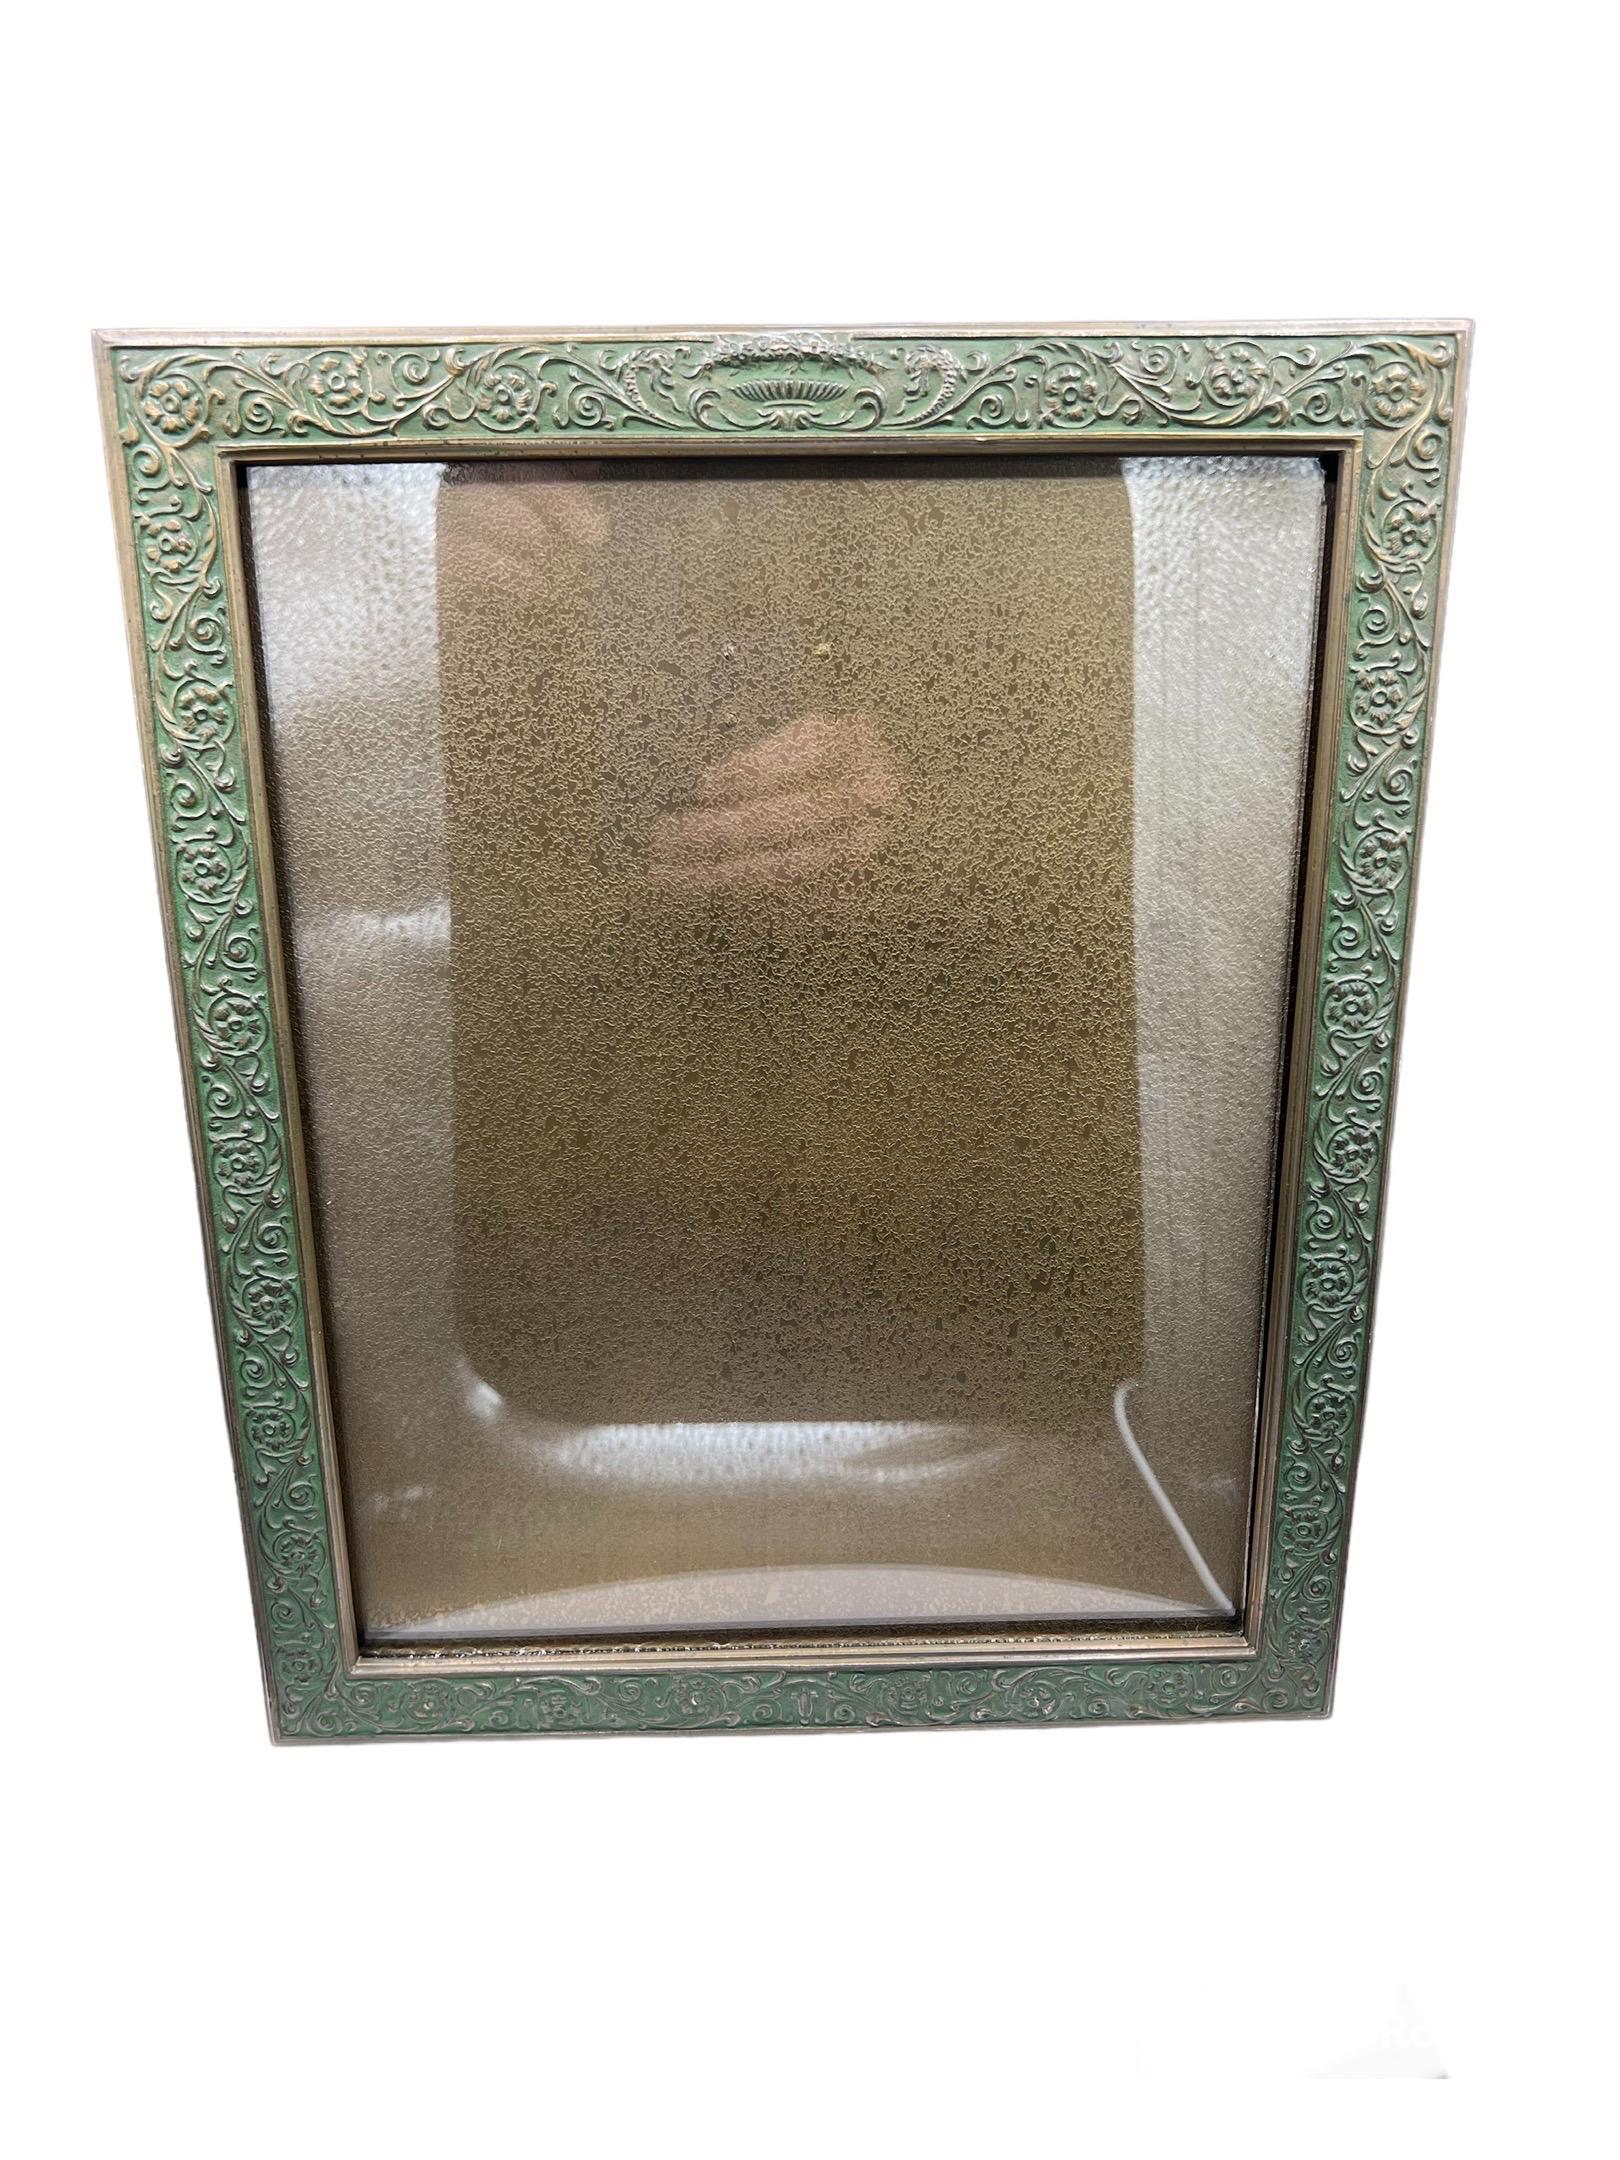 Tiffany Studios gilt-bronze picture frame, Stamped Tiffany Studios/NY/1611. For Sale 4